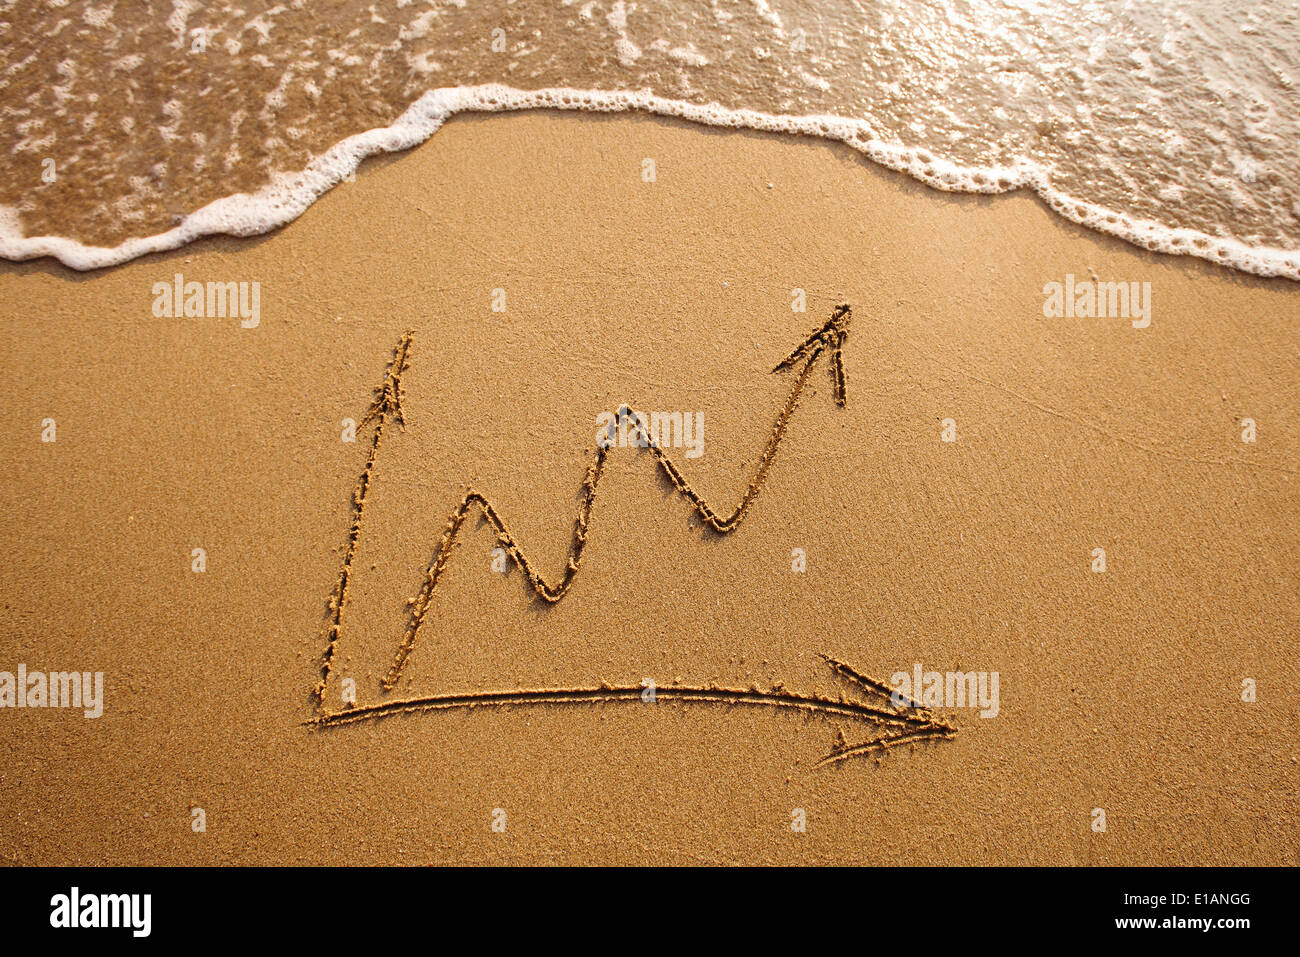 growth in business, chart drawn on the sand Stock Photo